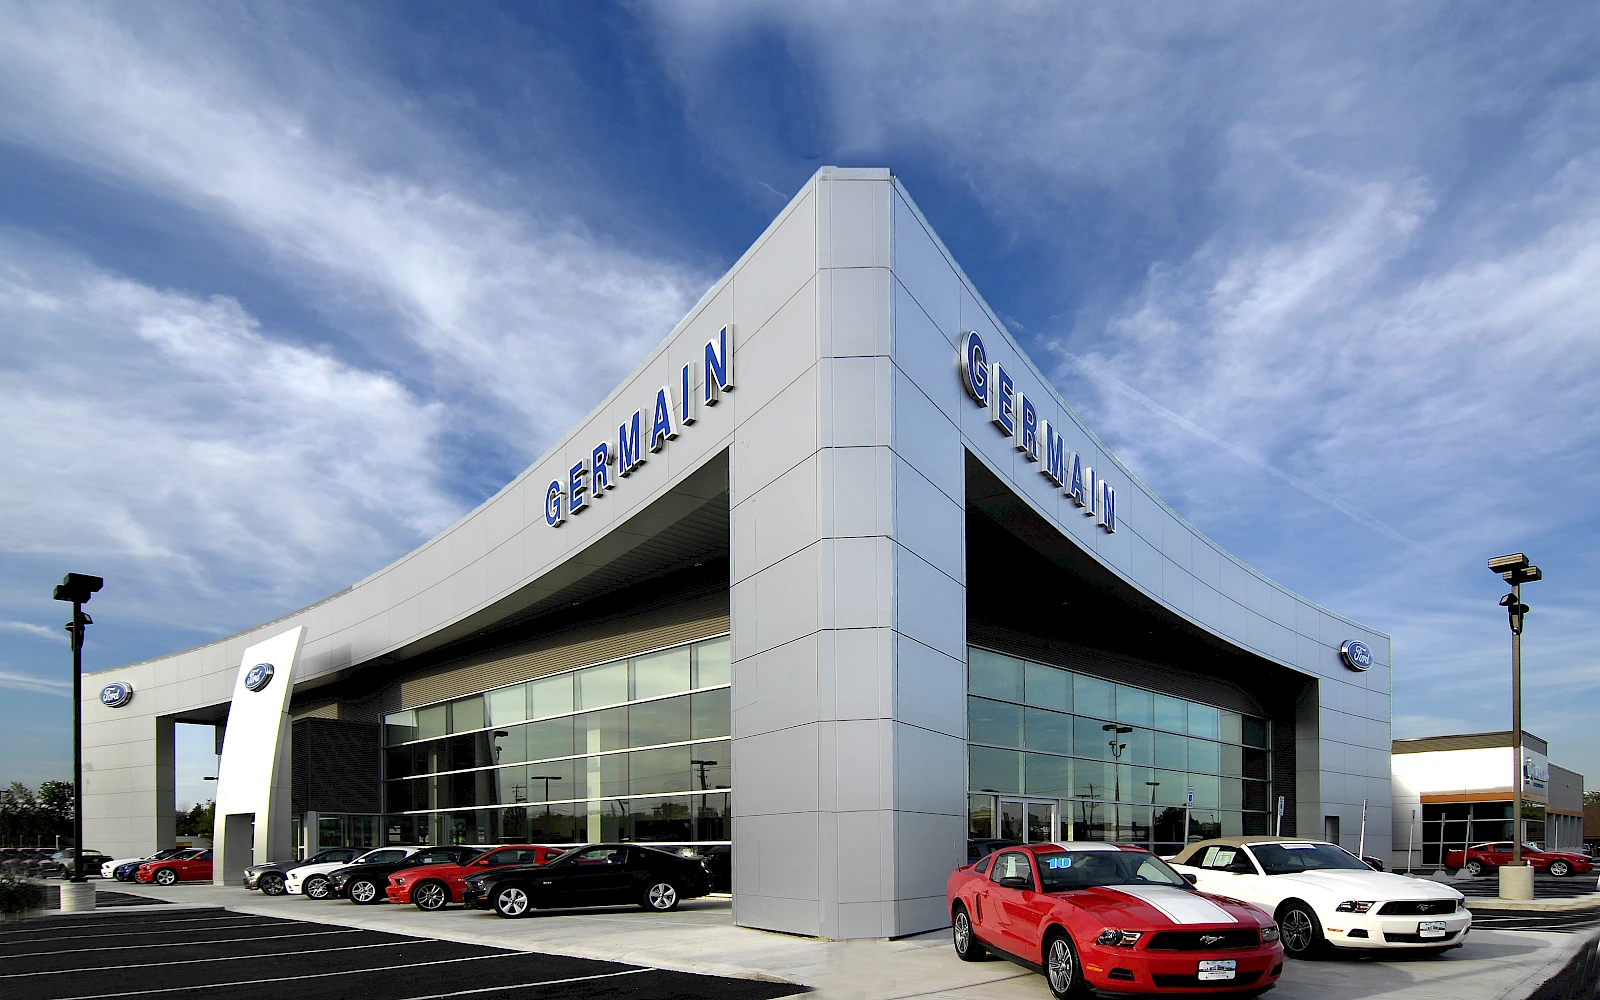 Germain Ford auto dealership construction finished picture 2